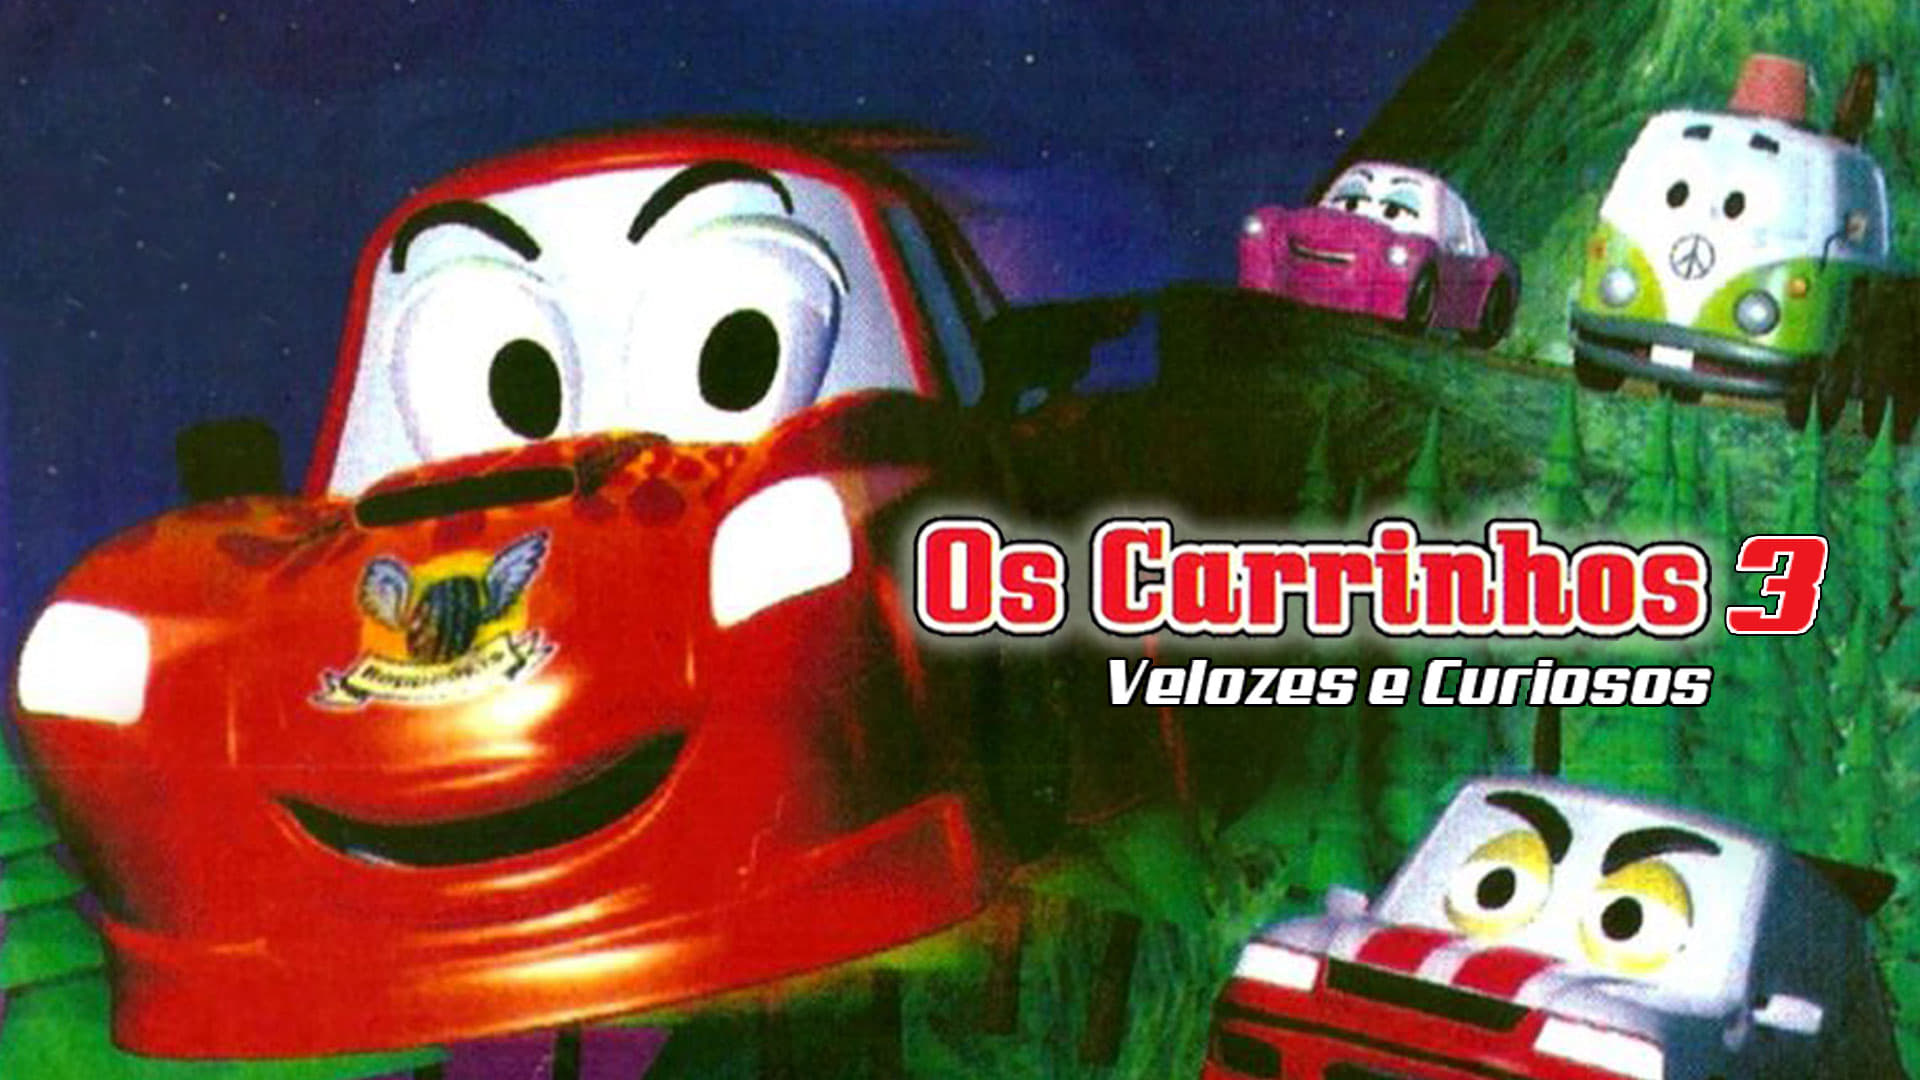 The Little Cars 3: Fast and Curious